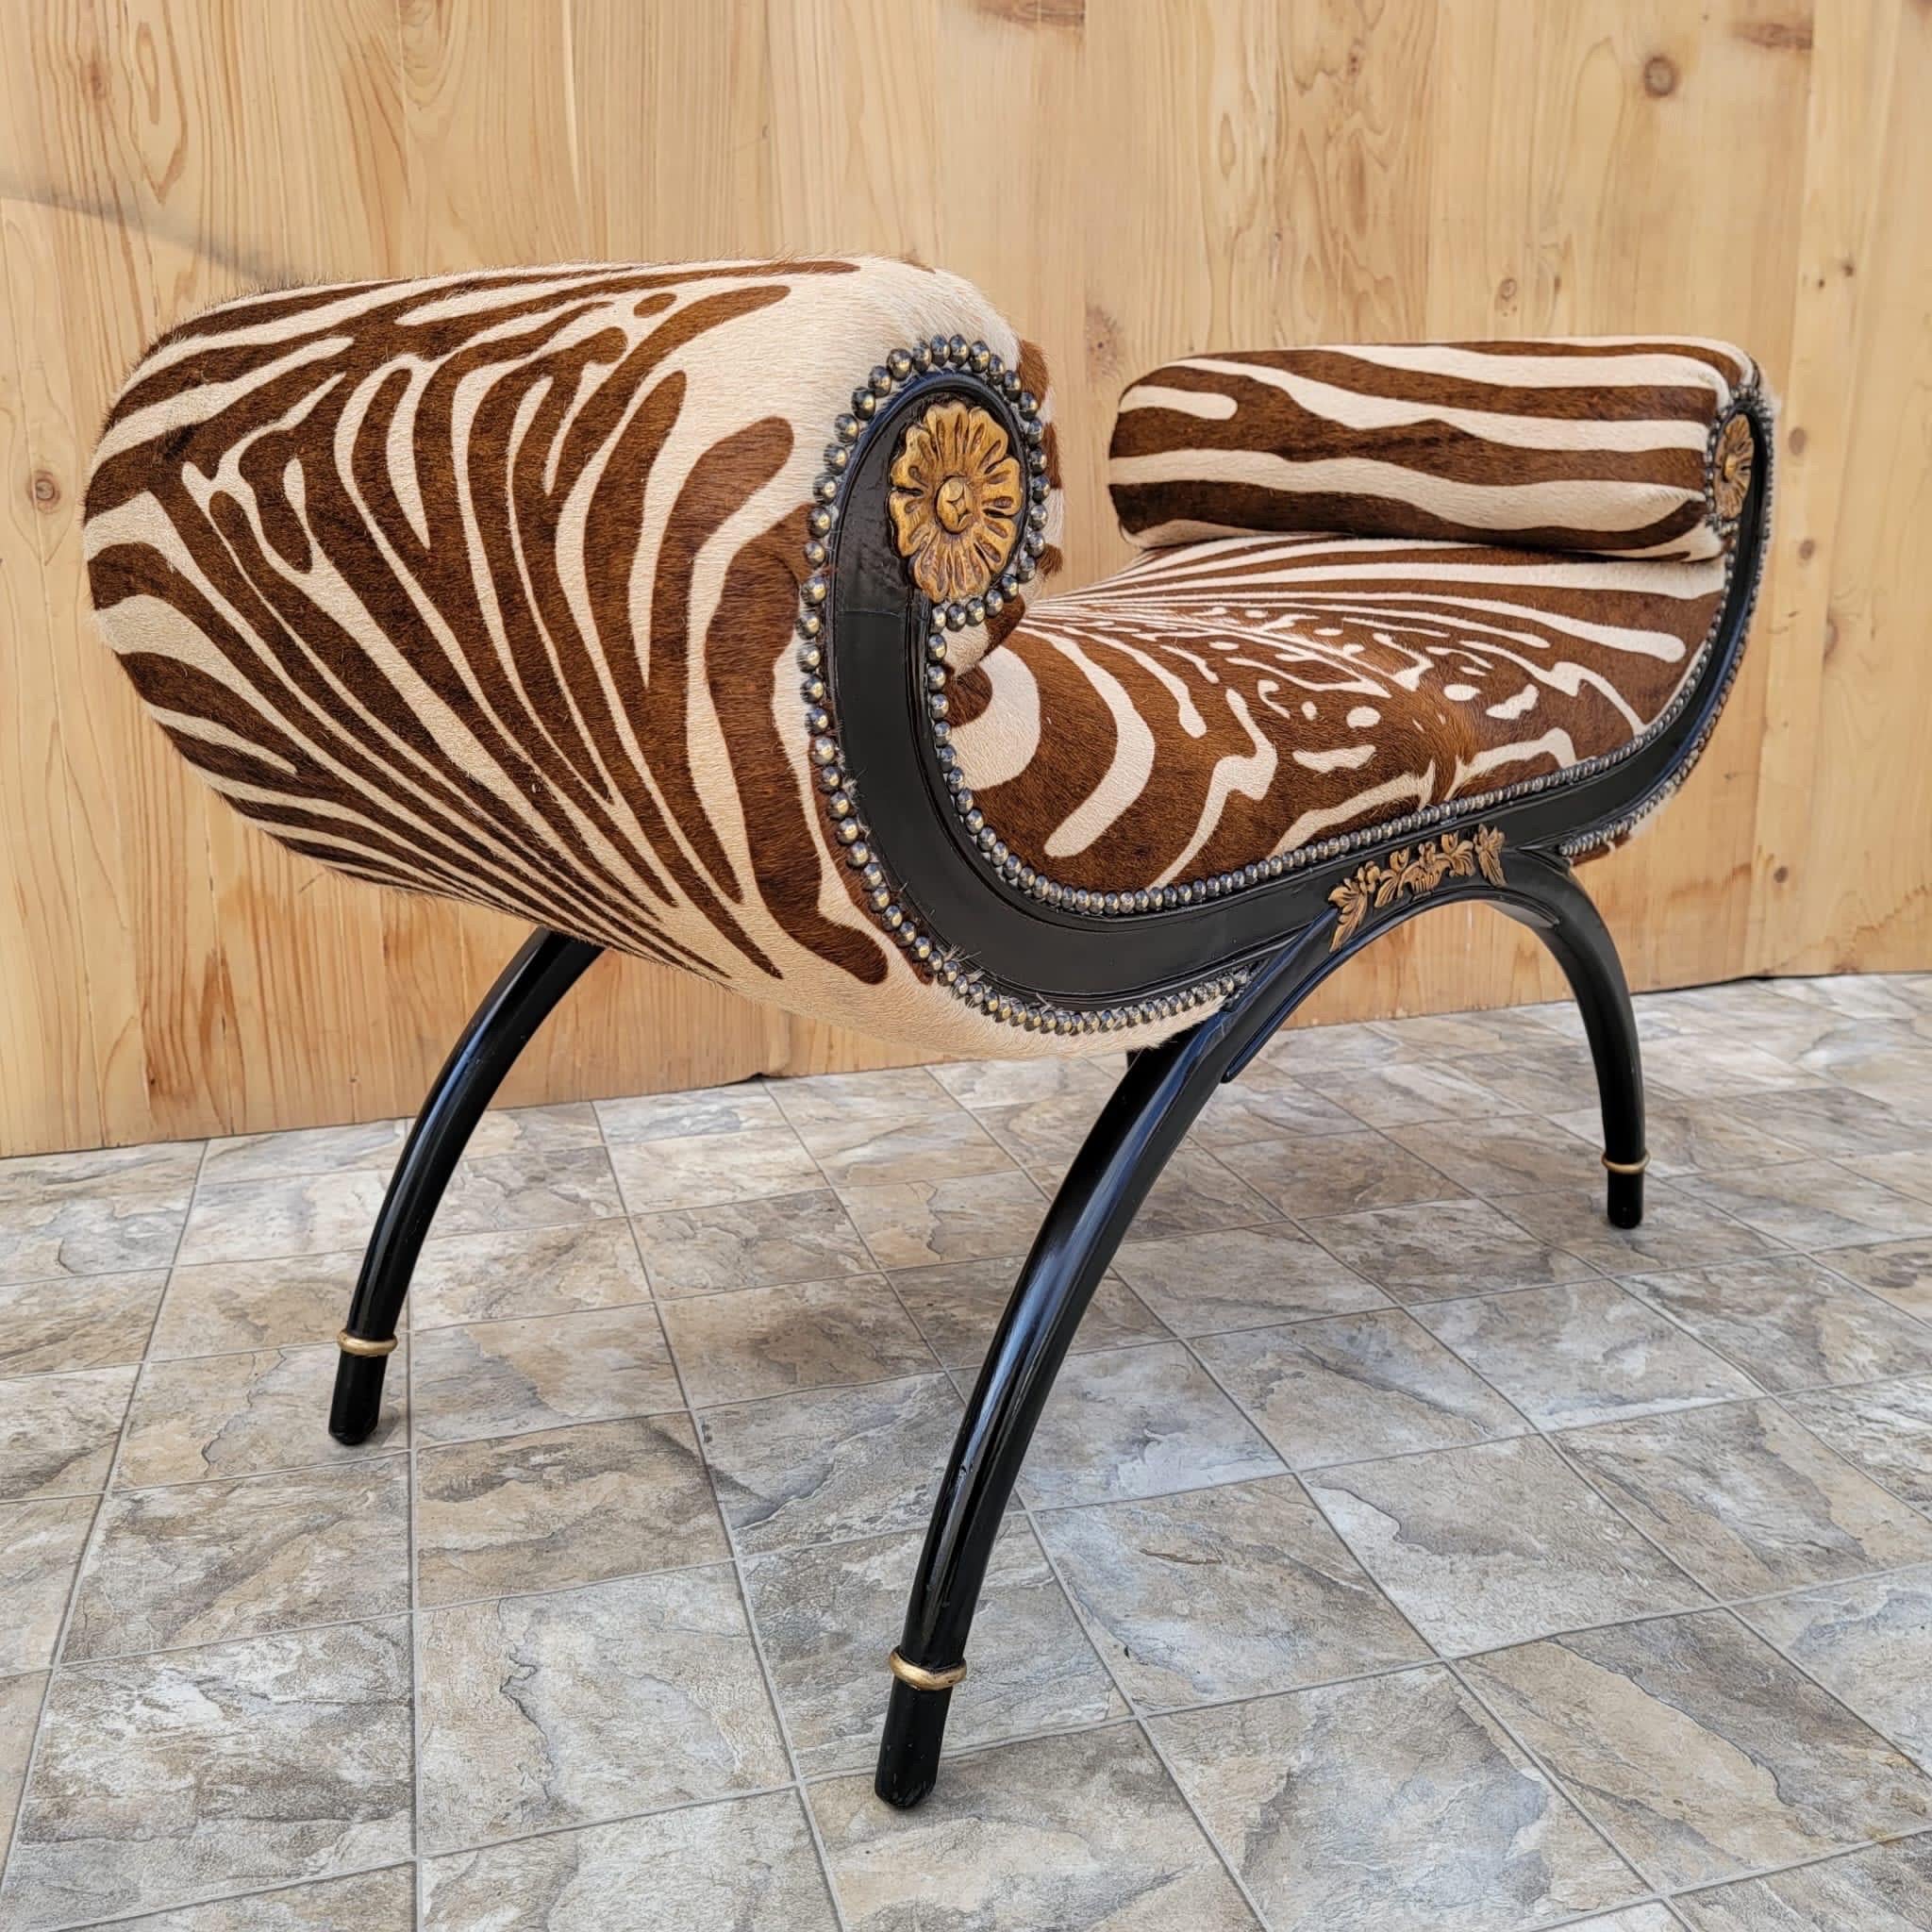 Regency Style Ebonized and Gilded Wood Scroll-Arm Zebra Striped Cowhide Bench For Sale 6